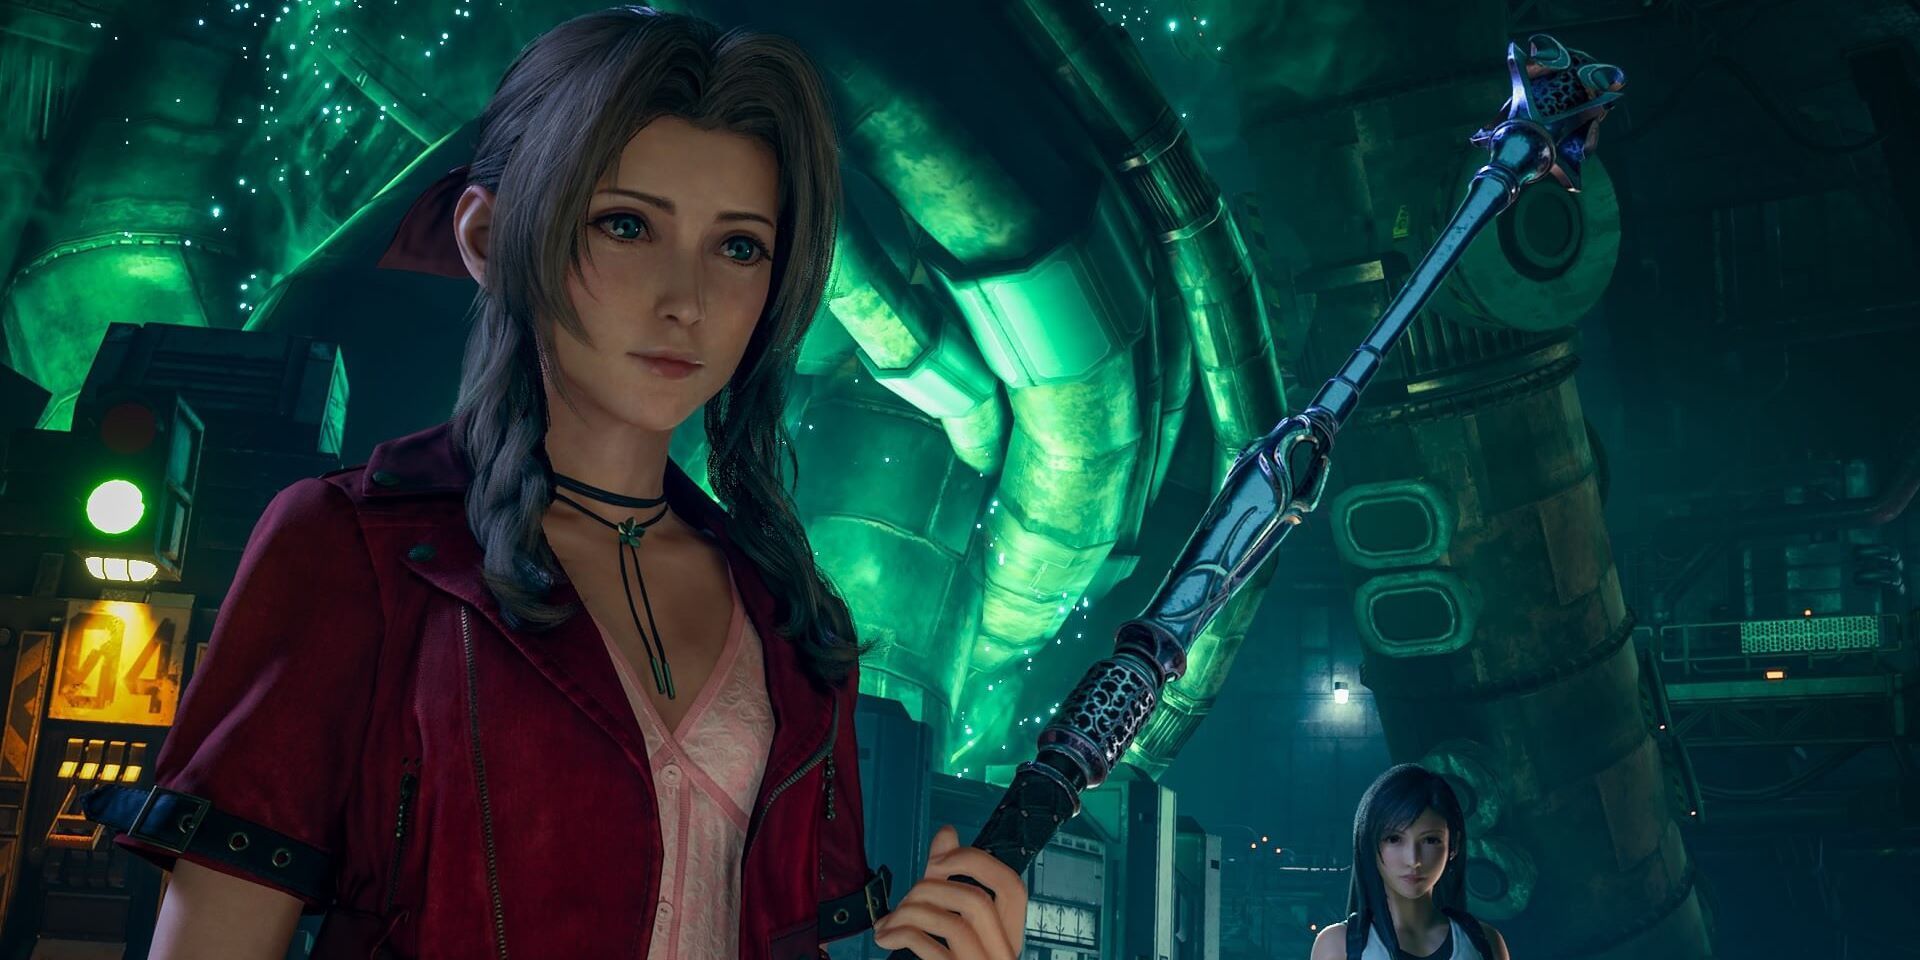 Final Fantasy VII Remake: Traces of Two Pasts